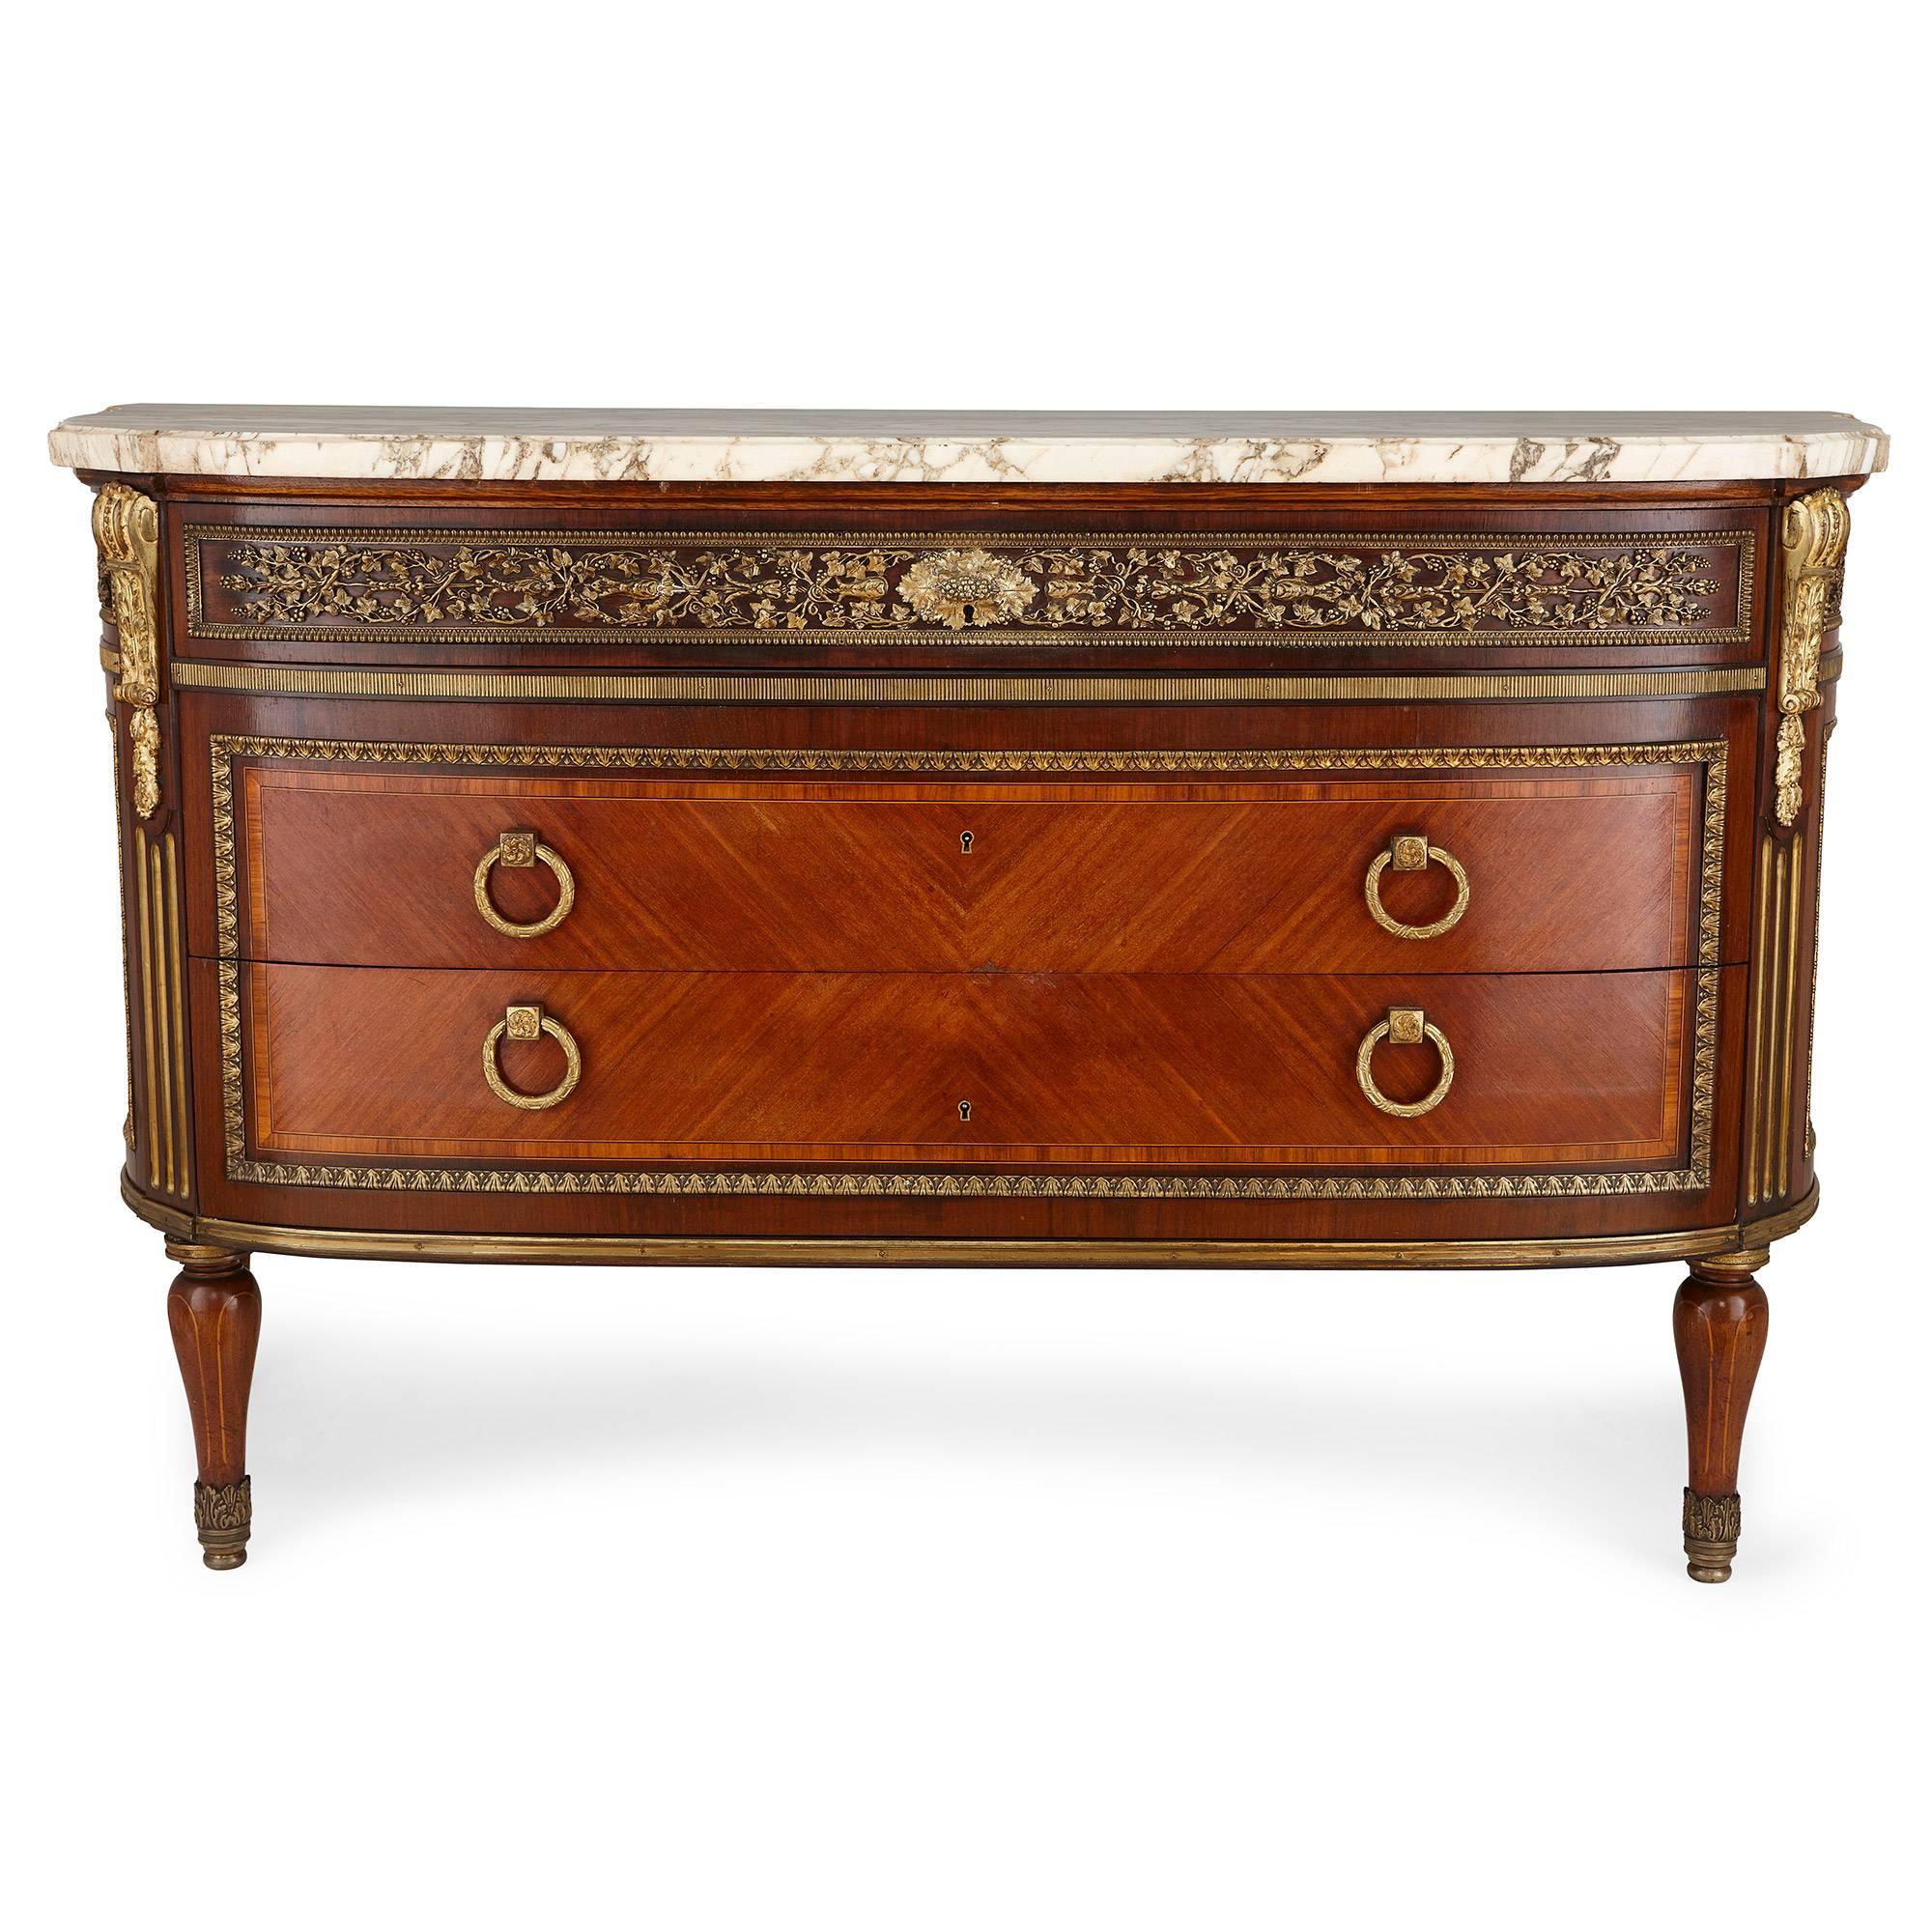 This fine, delicately ornamented commode was built by French designers Myrtil Dennery and Paul Alexandre who were active in the early 20th century, after the 18th Century model by celebrated French cabinetmaker Jean-Francois Leleu (French,